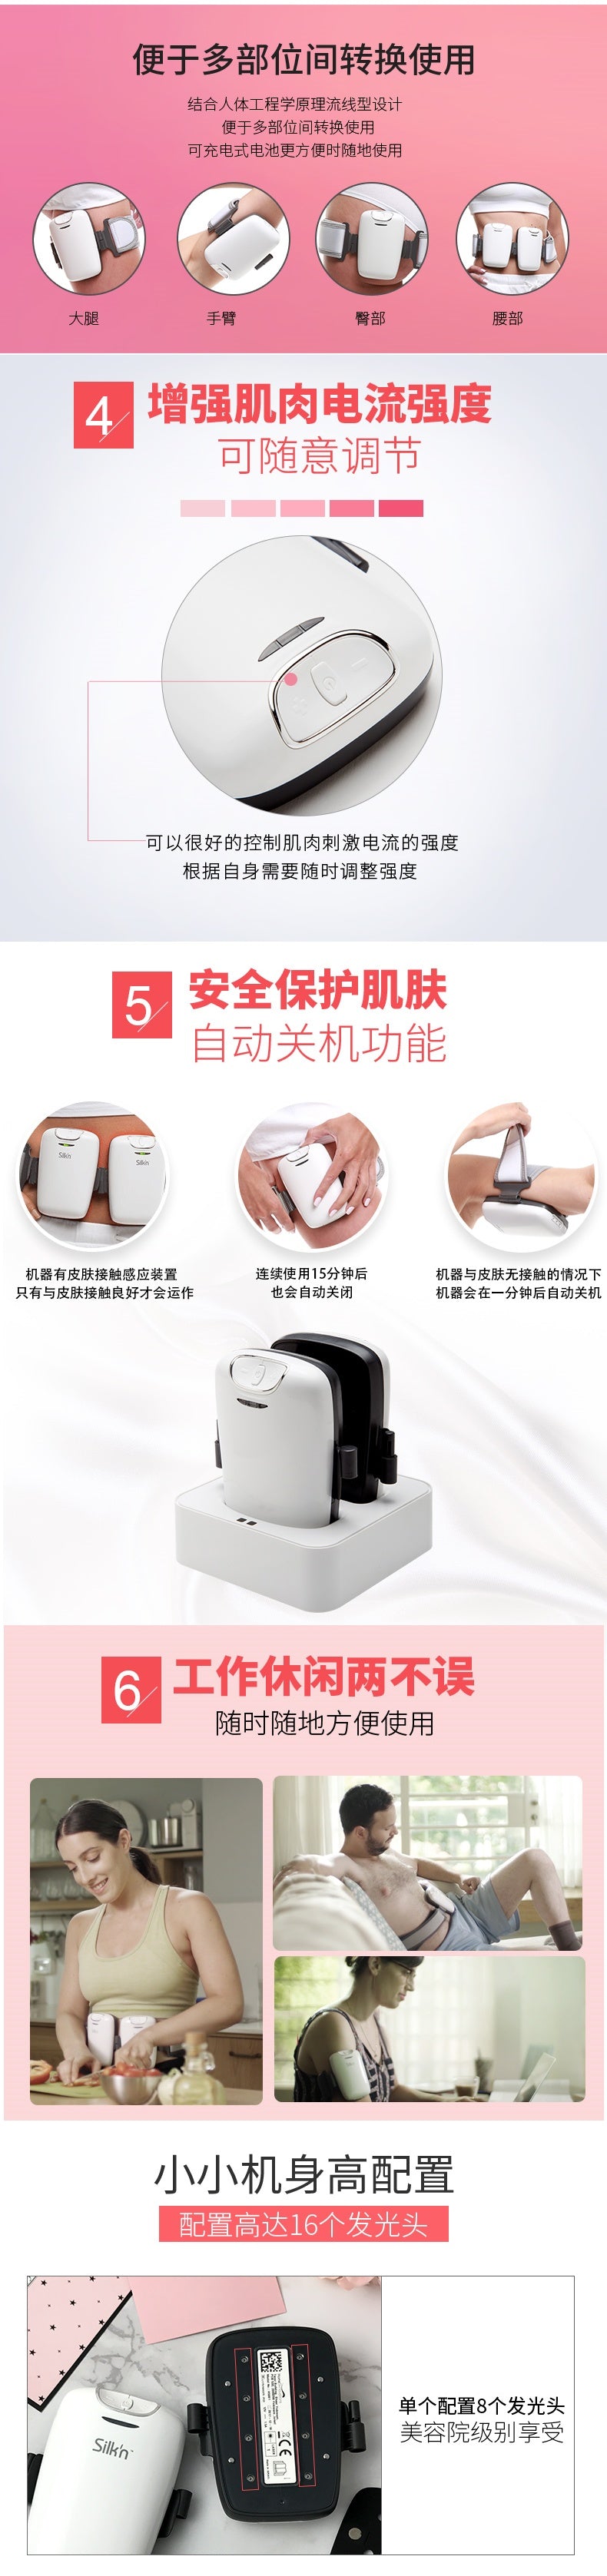 6 Reasons why you should use Silk'n Lipo, the cellulite removal machine can provide anti cellulite massage and burn fat at thighs, arms, buttock and waist. - Silk'n Lipo Fat Reduction Device - Beautyfoomall.com Malaysia